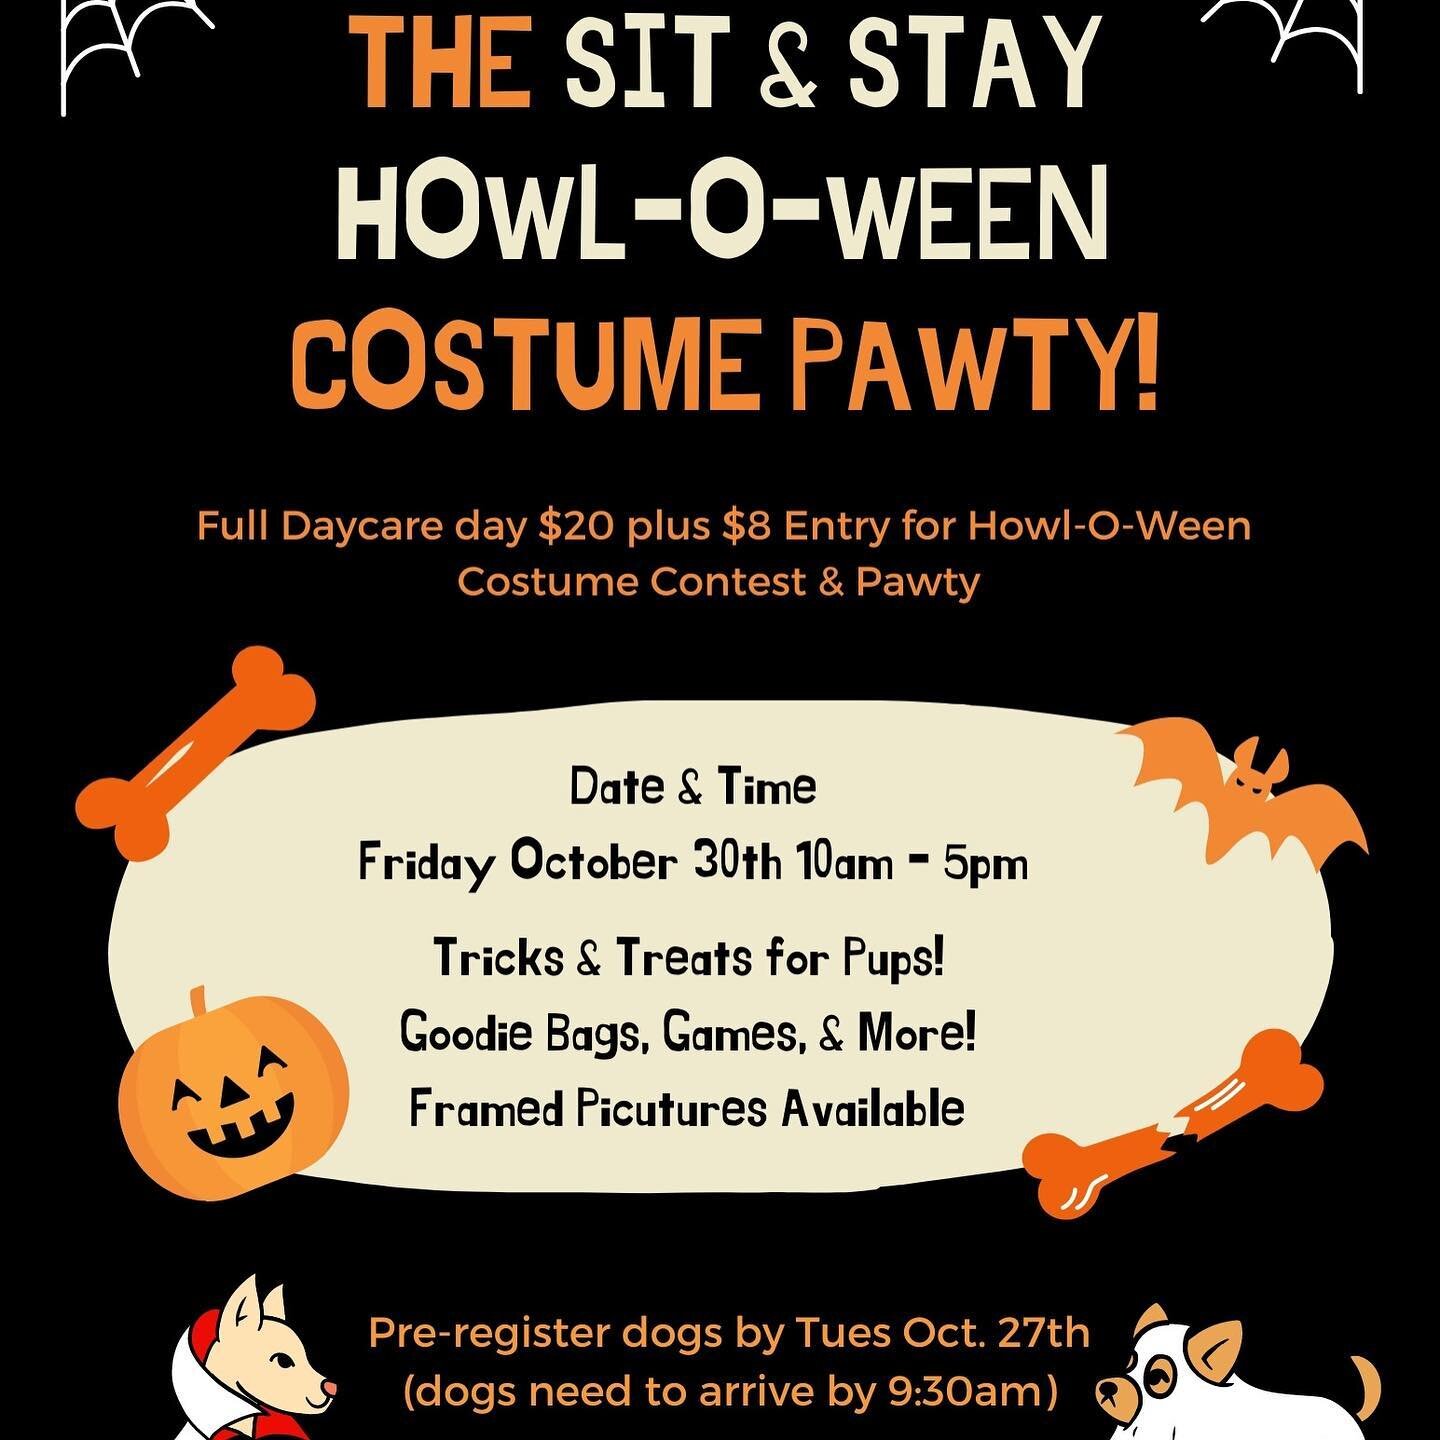 Two weeks until the Howl-O-Ween Costume Pawty! Click the link in our bio or visit our website for details! It&rsquo;s going to be a Spooktacular time! 👻